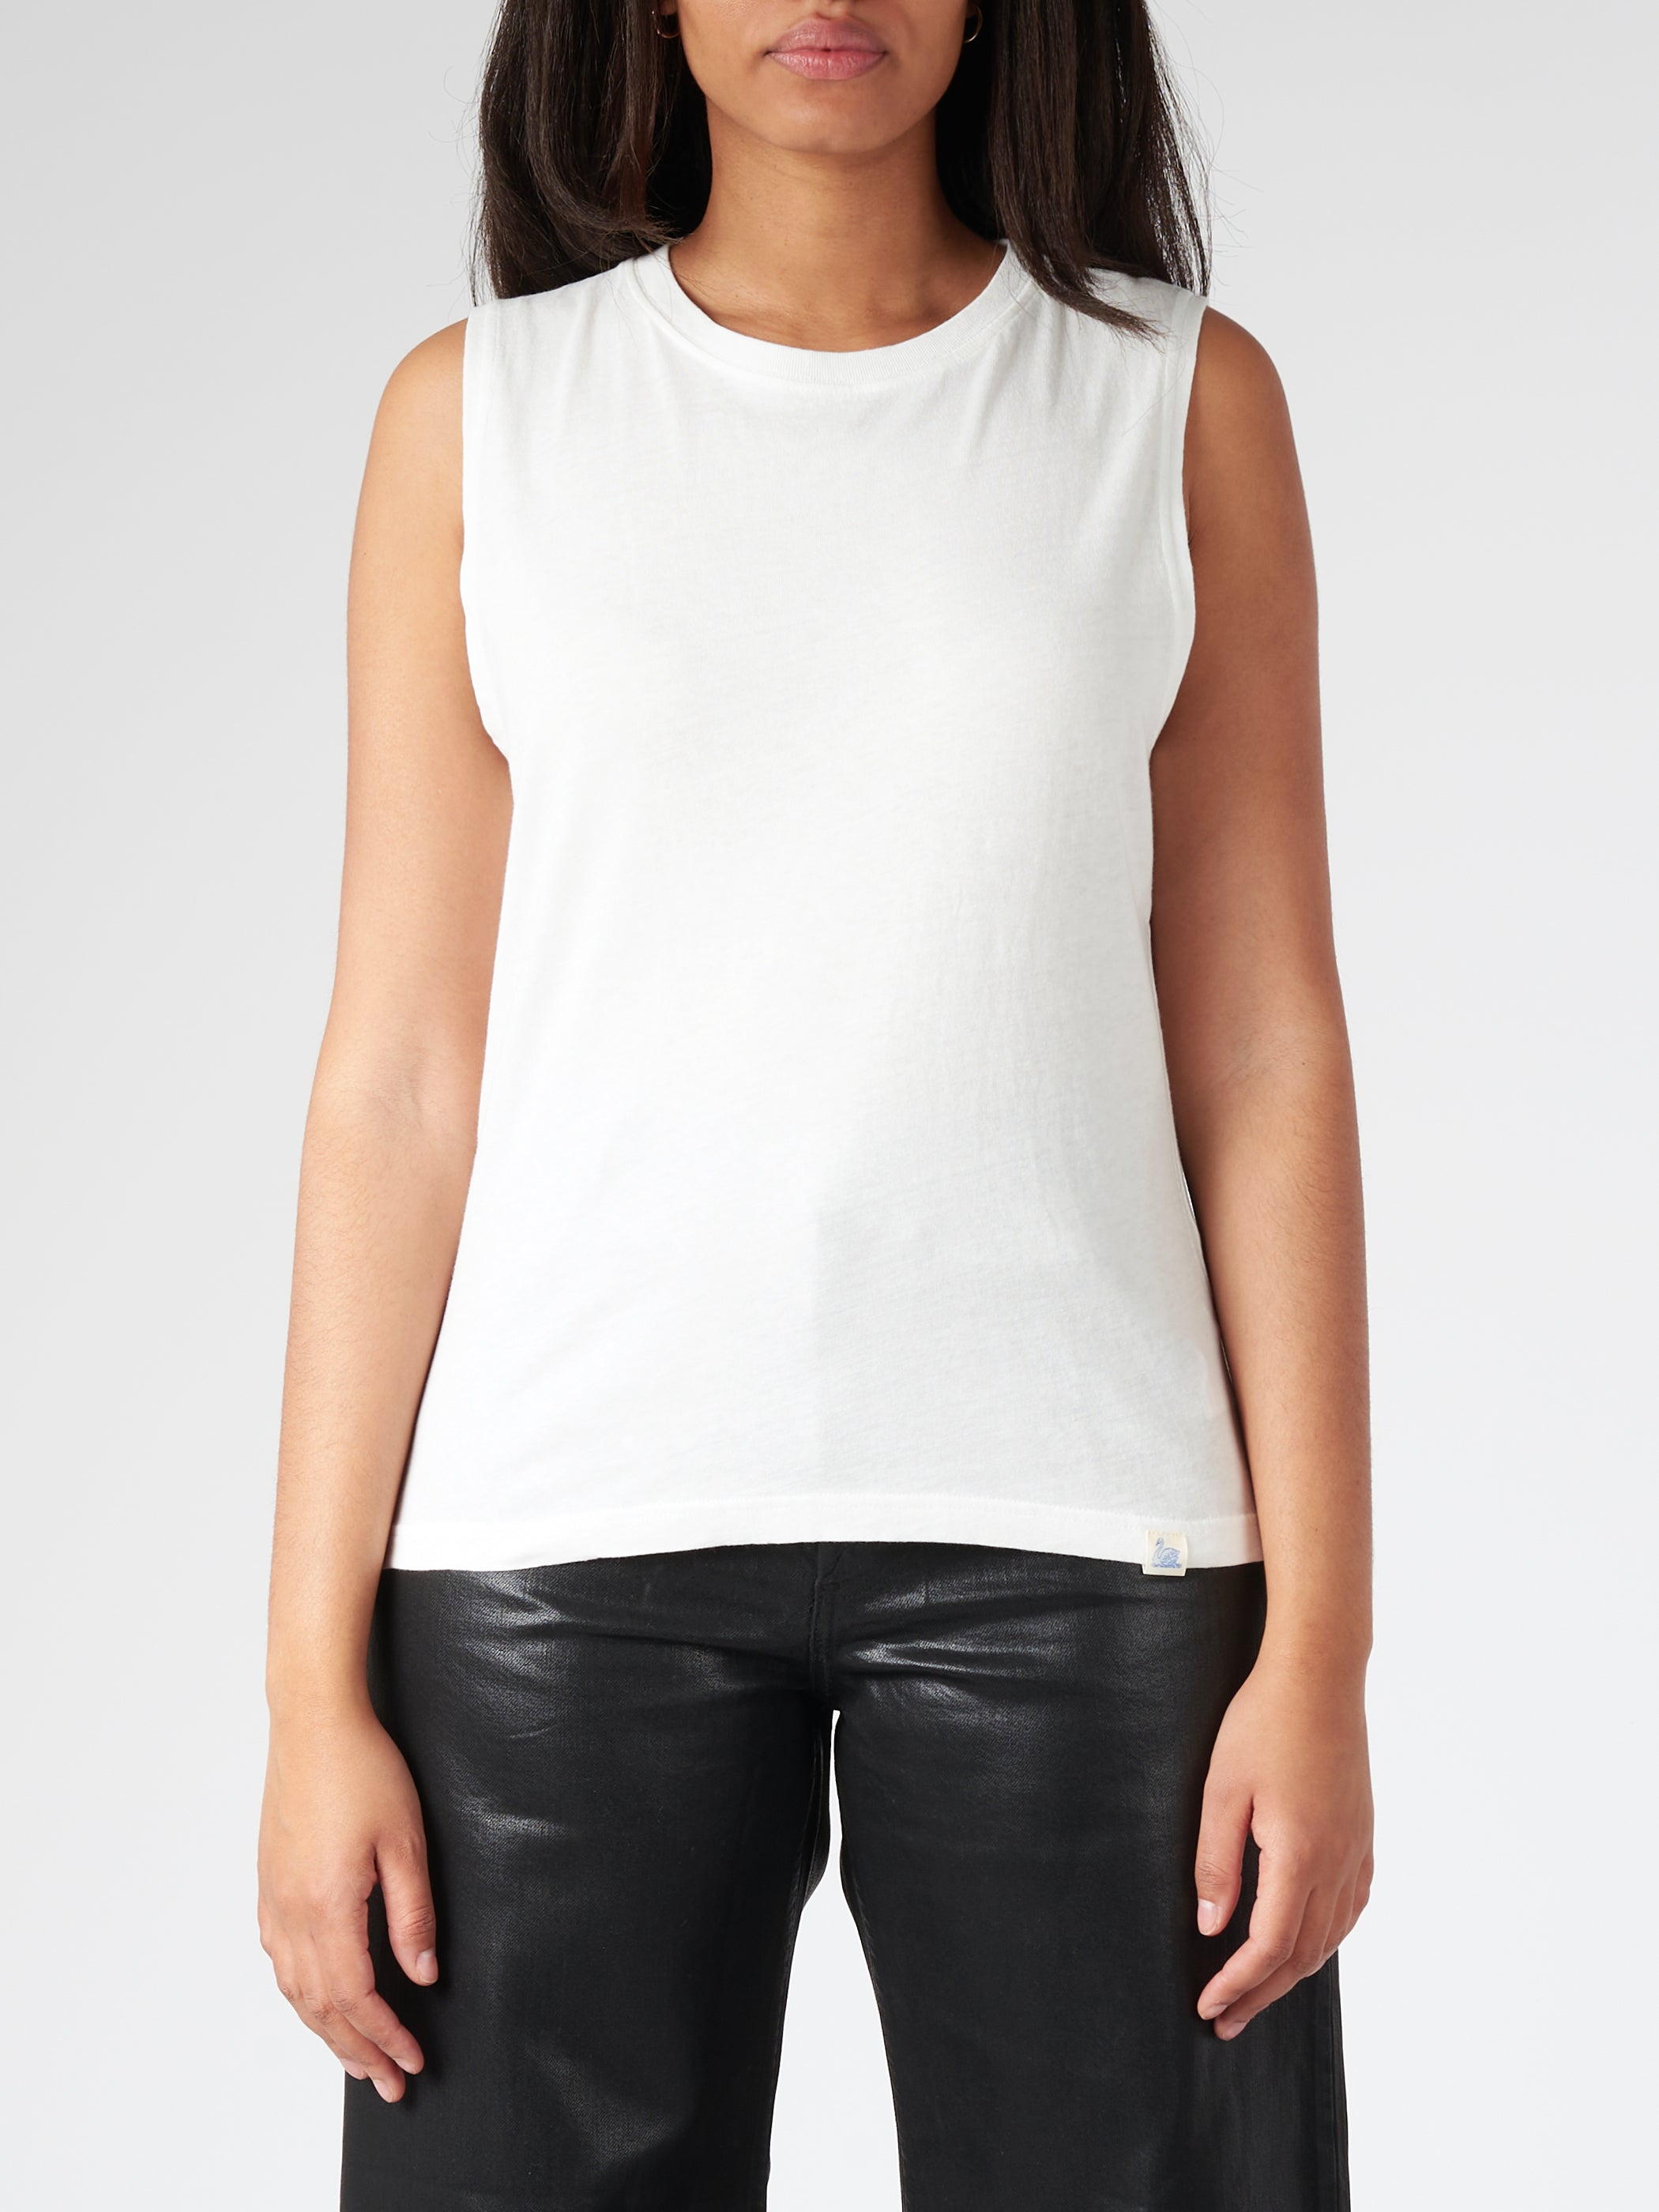 Women's Relaxed Fit Sleeveless Top